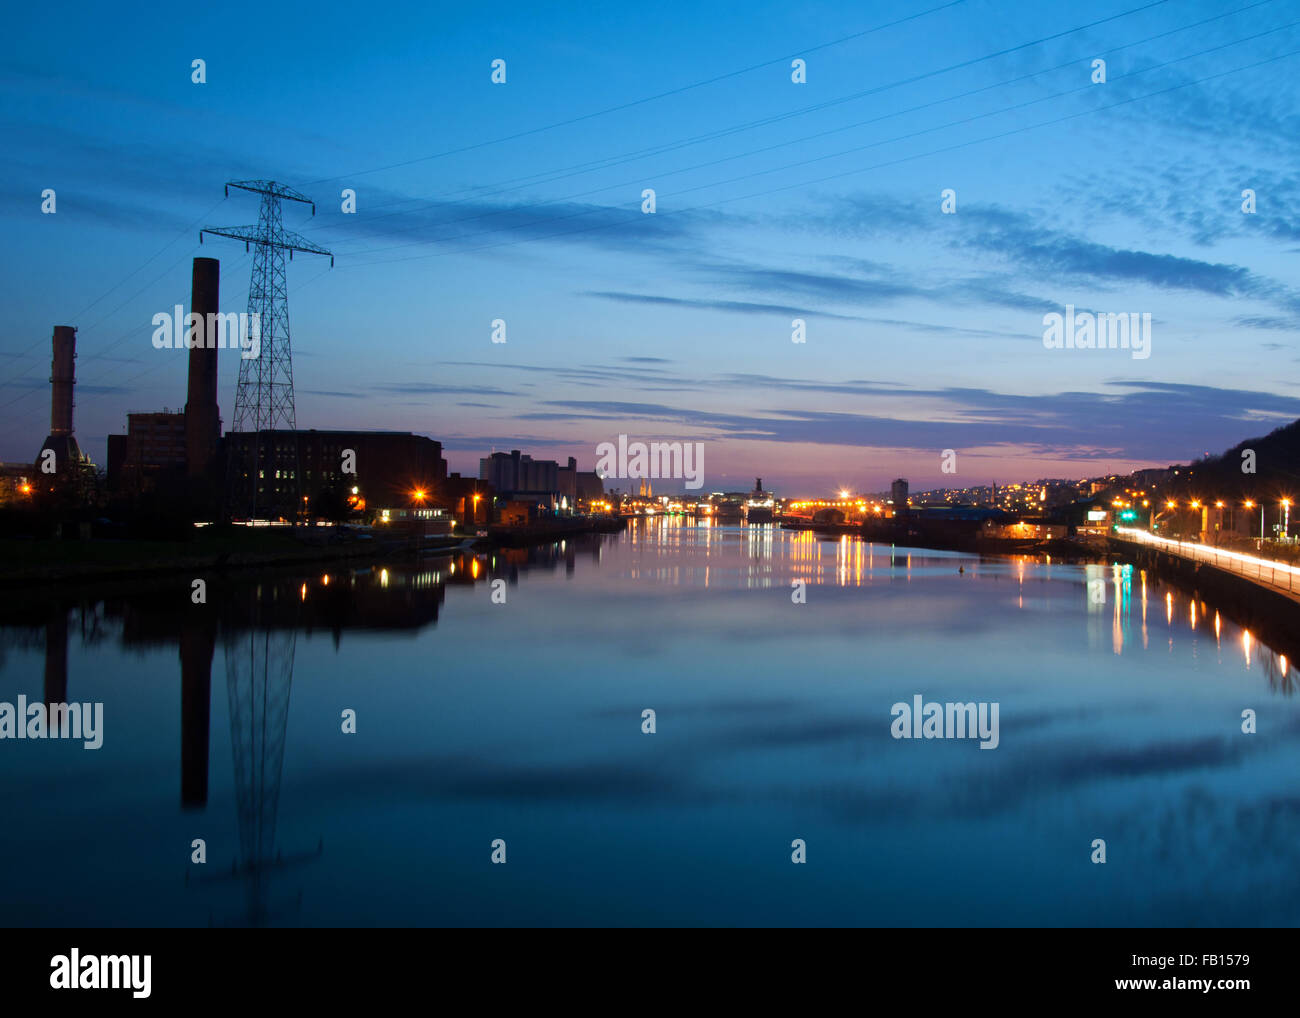 ESB power station and Cork City docks on the River Lee, Cork, Ireland, at night. Stock Photo